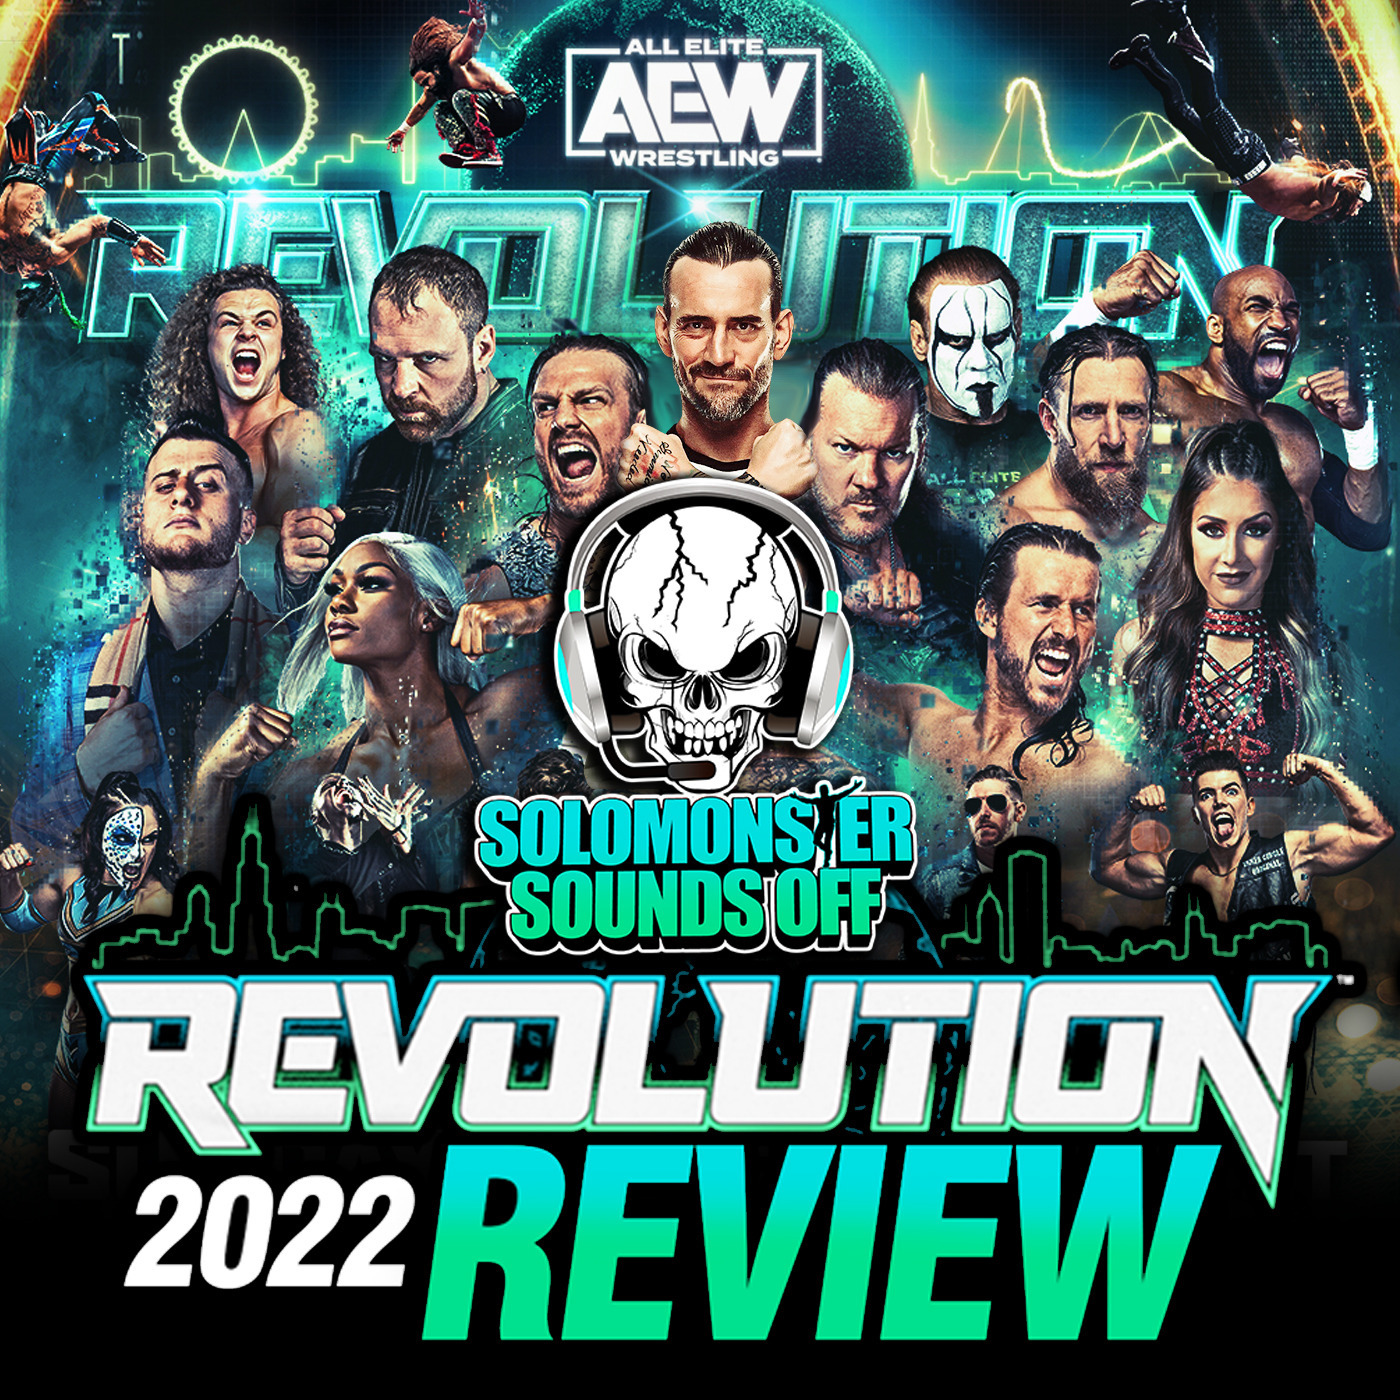 AEW Revolution 2022 Review ONE OF AEW’S GREATEST SHOWS, WILLIAM REGAL